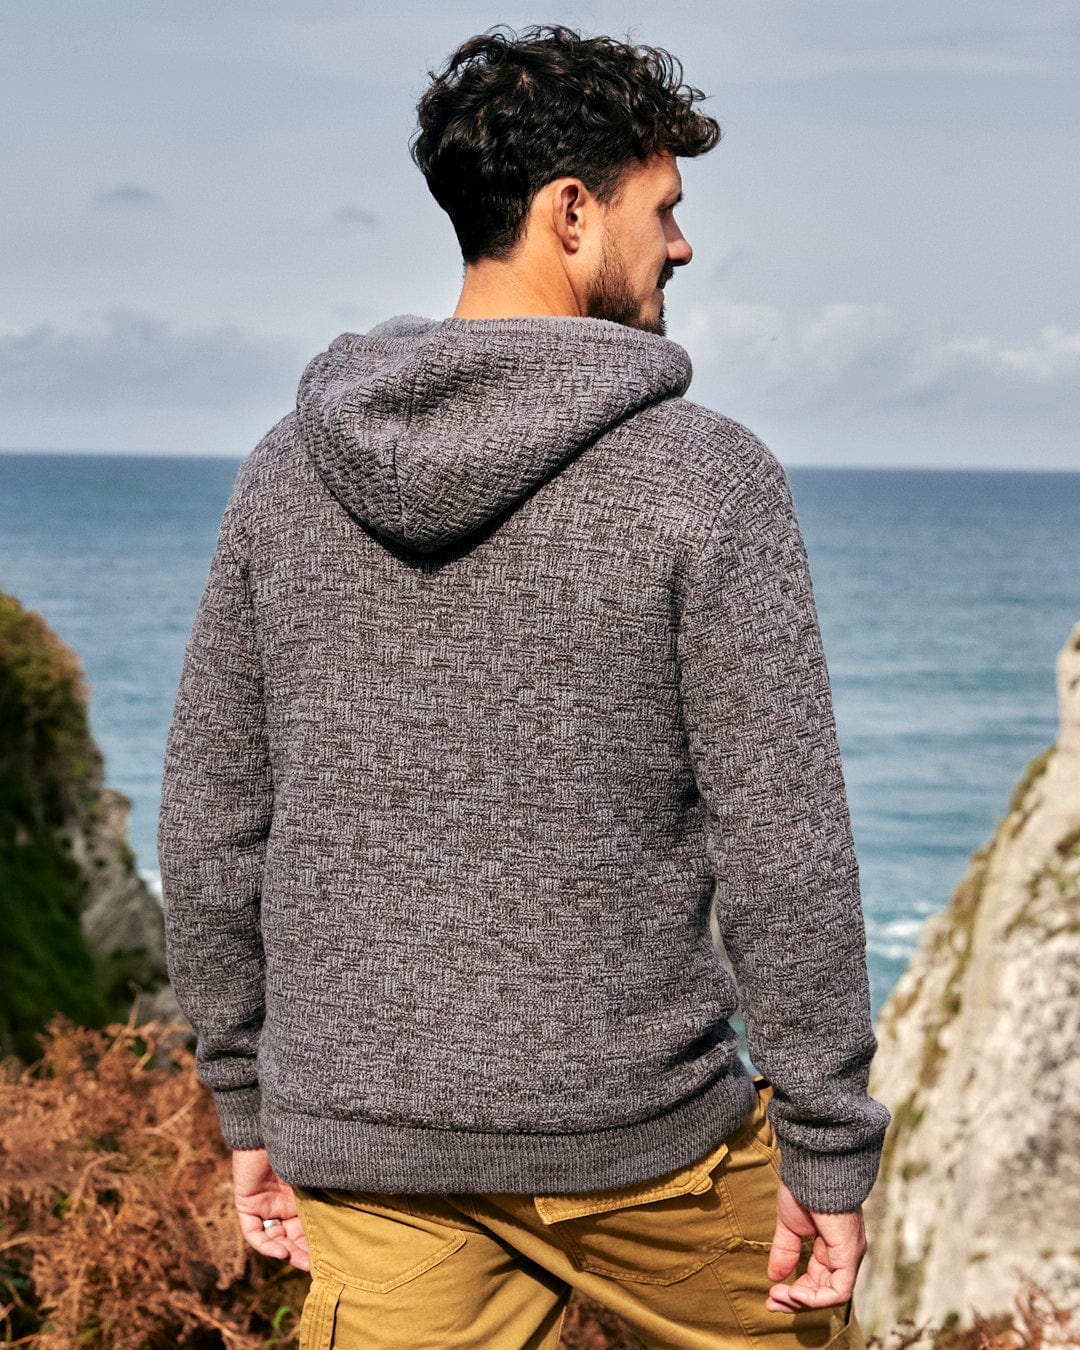 A man wearing a Saltrock Markus - Mens Borg Lined Knit Hoodie - Grey, embracing winter days as he gazes at the ocean.